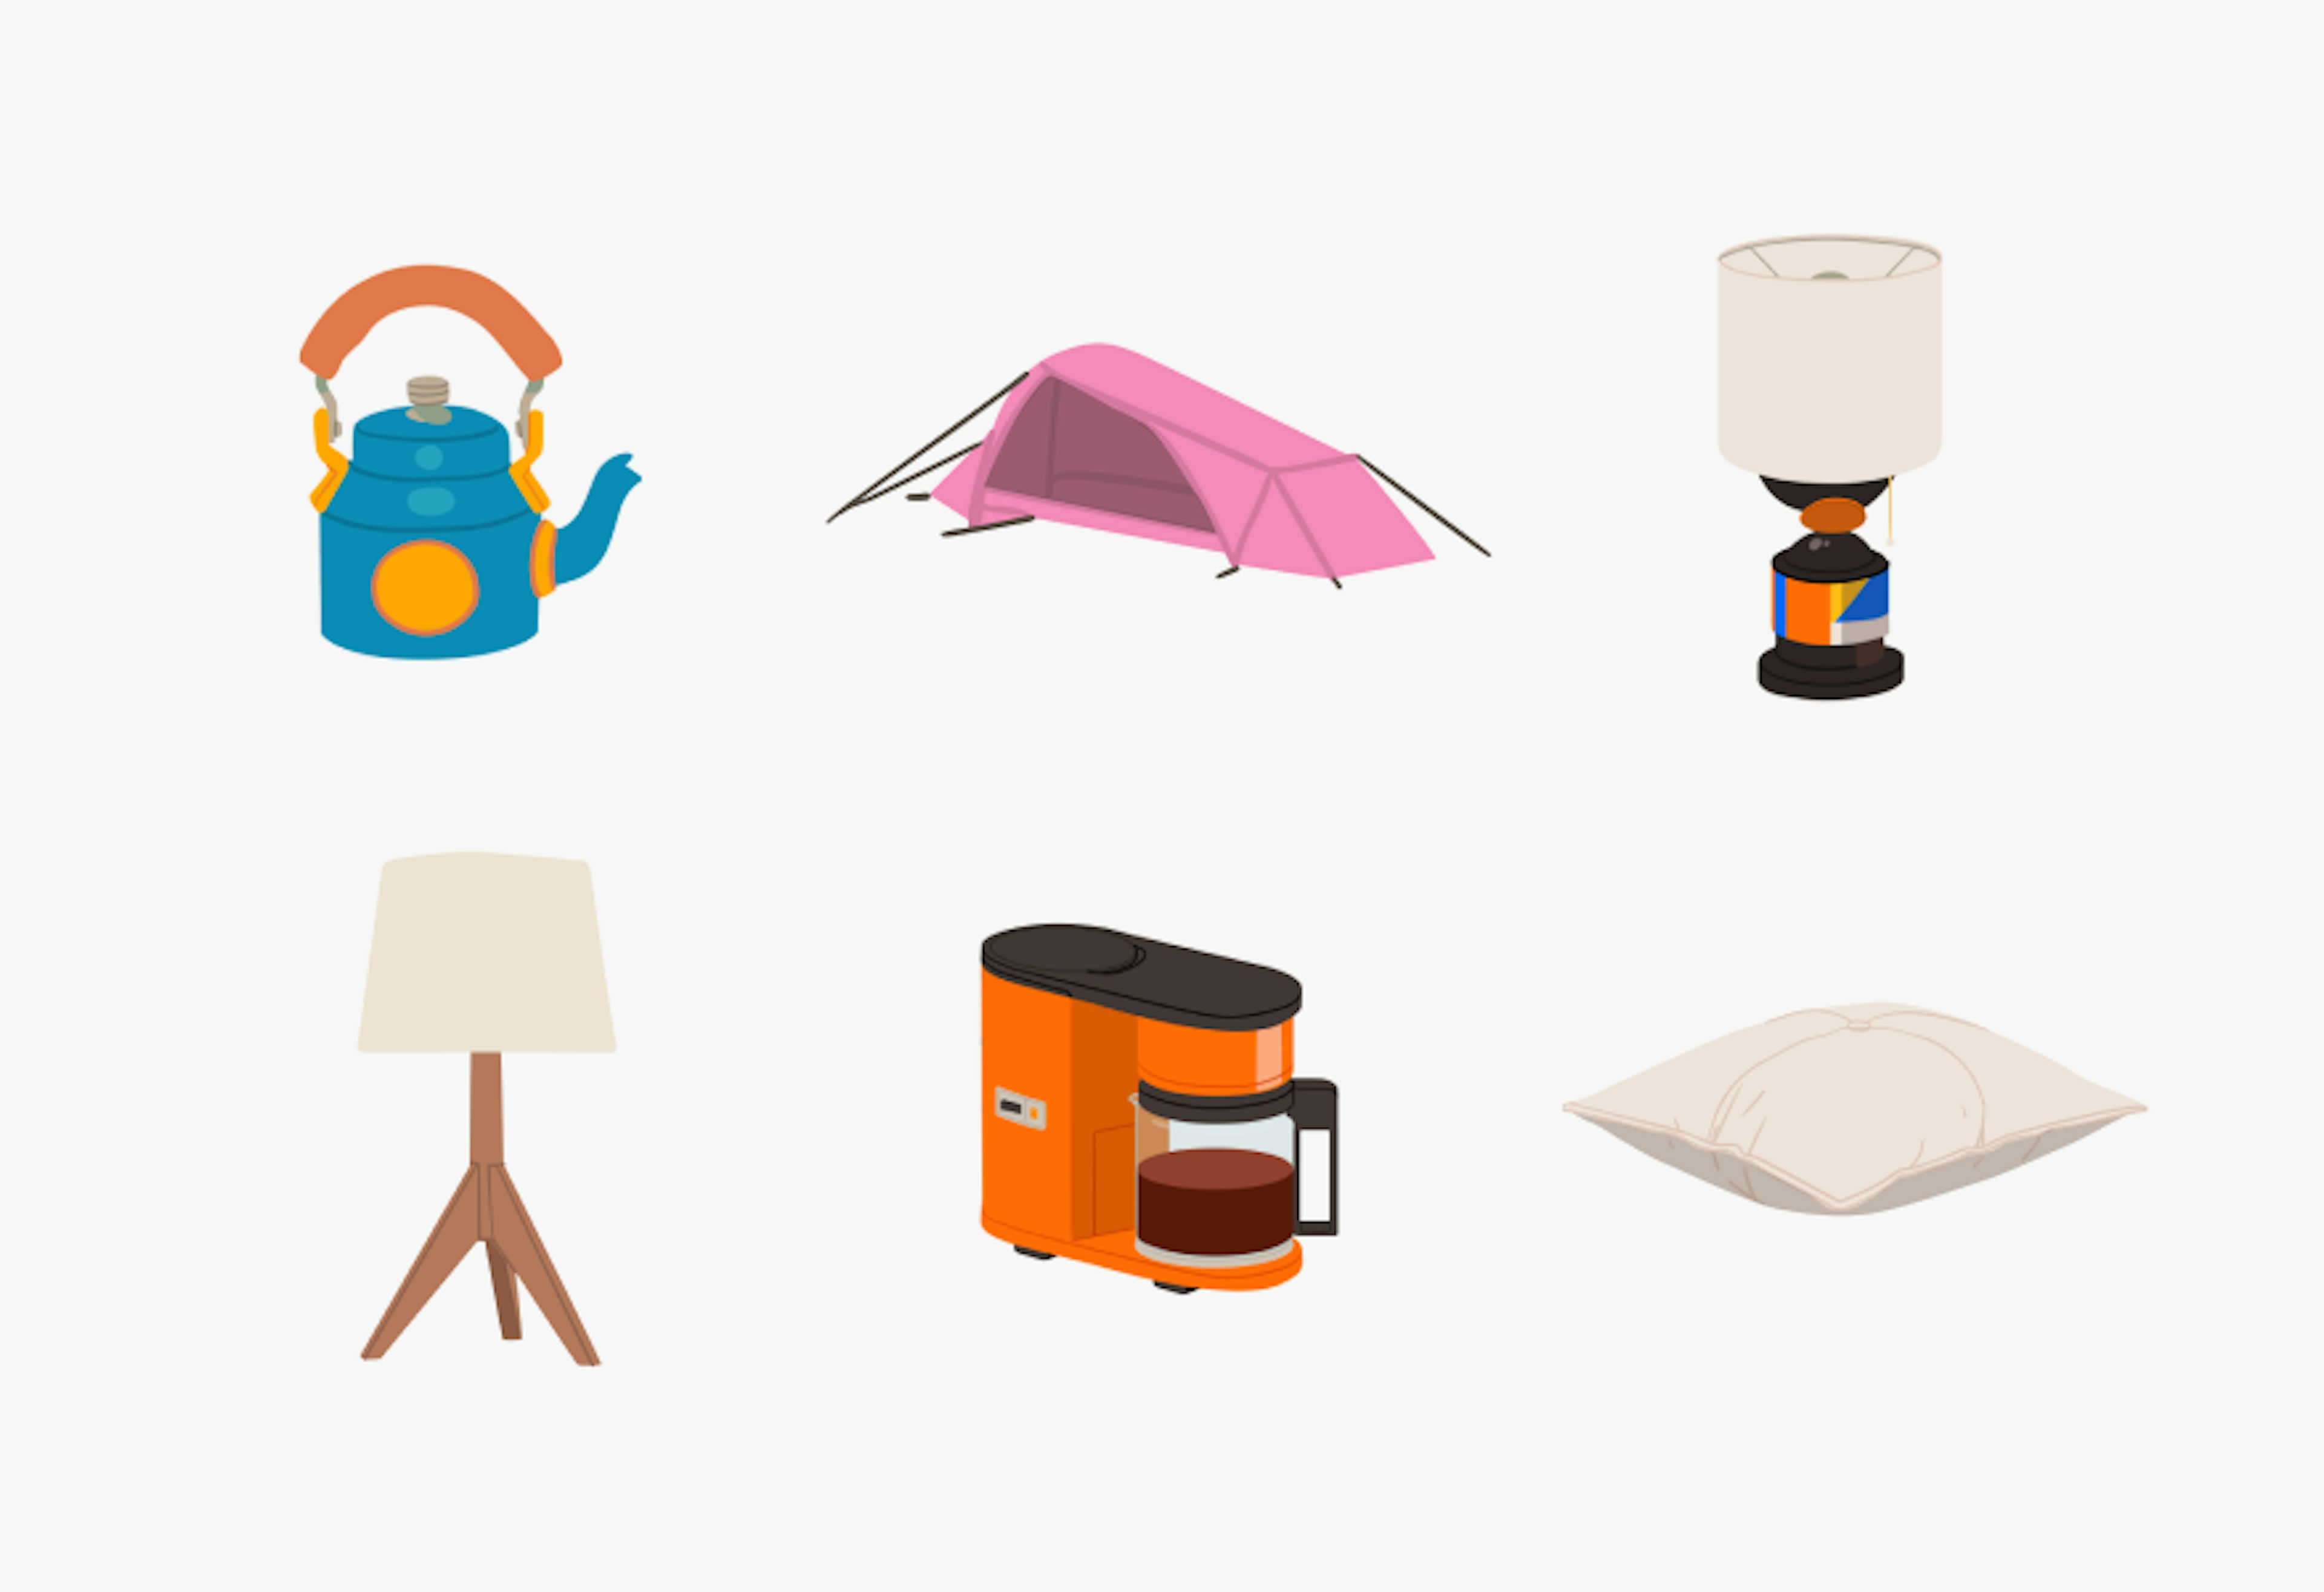 6 distinct illustrations highlighting the home category:
A blue and orange kettle.
A pink tent.
A table lamp with a white shade and a colorful base.
A floor lamp with a white shade and wooden tripod legs.
An orange and black coffee maker with a glass carafe.
A white pillow.